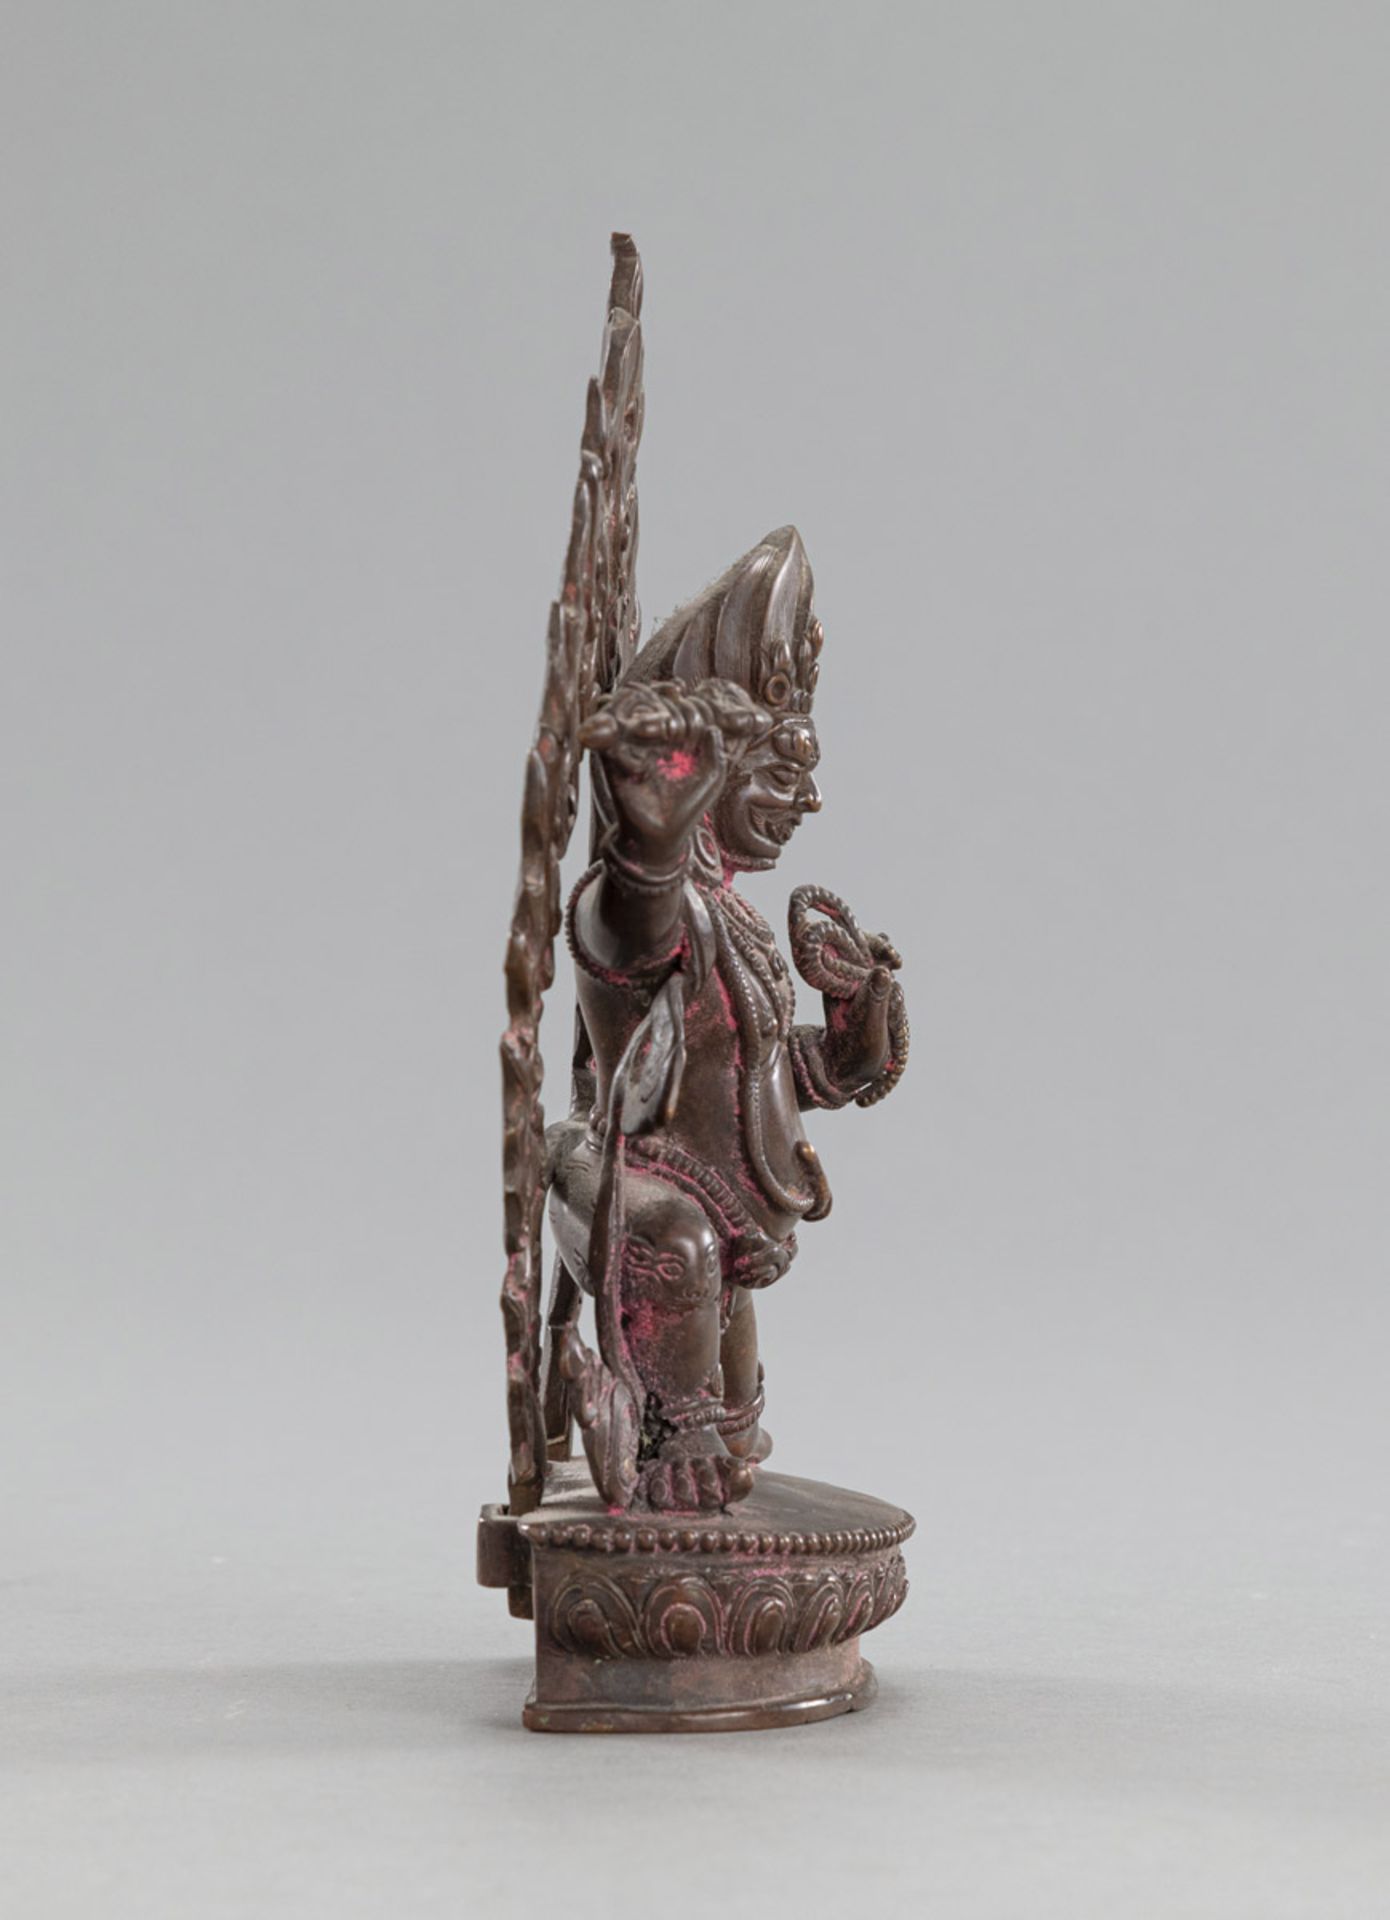 A BRONZE FIGURE OF VAJRAPANI WITH A FLAMING MANDORLA - Image 2 of 4